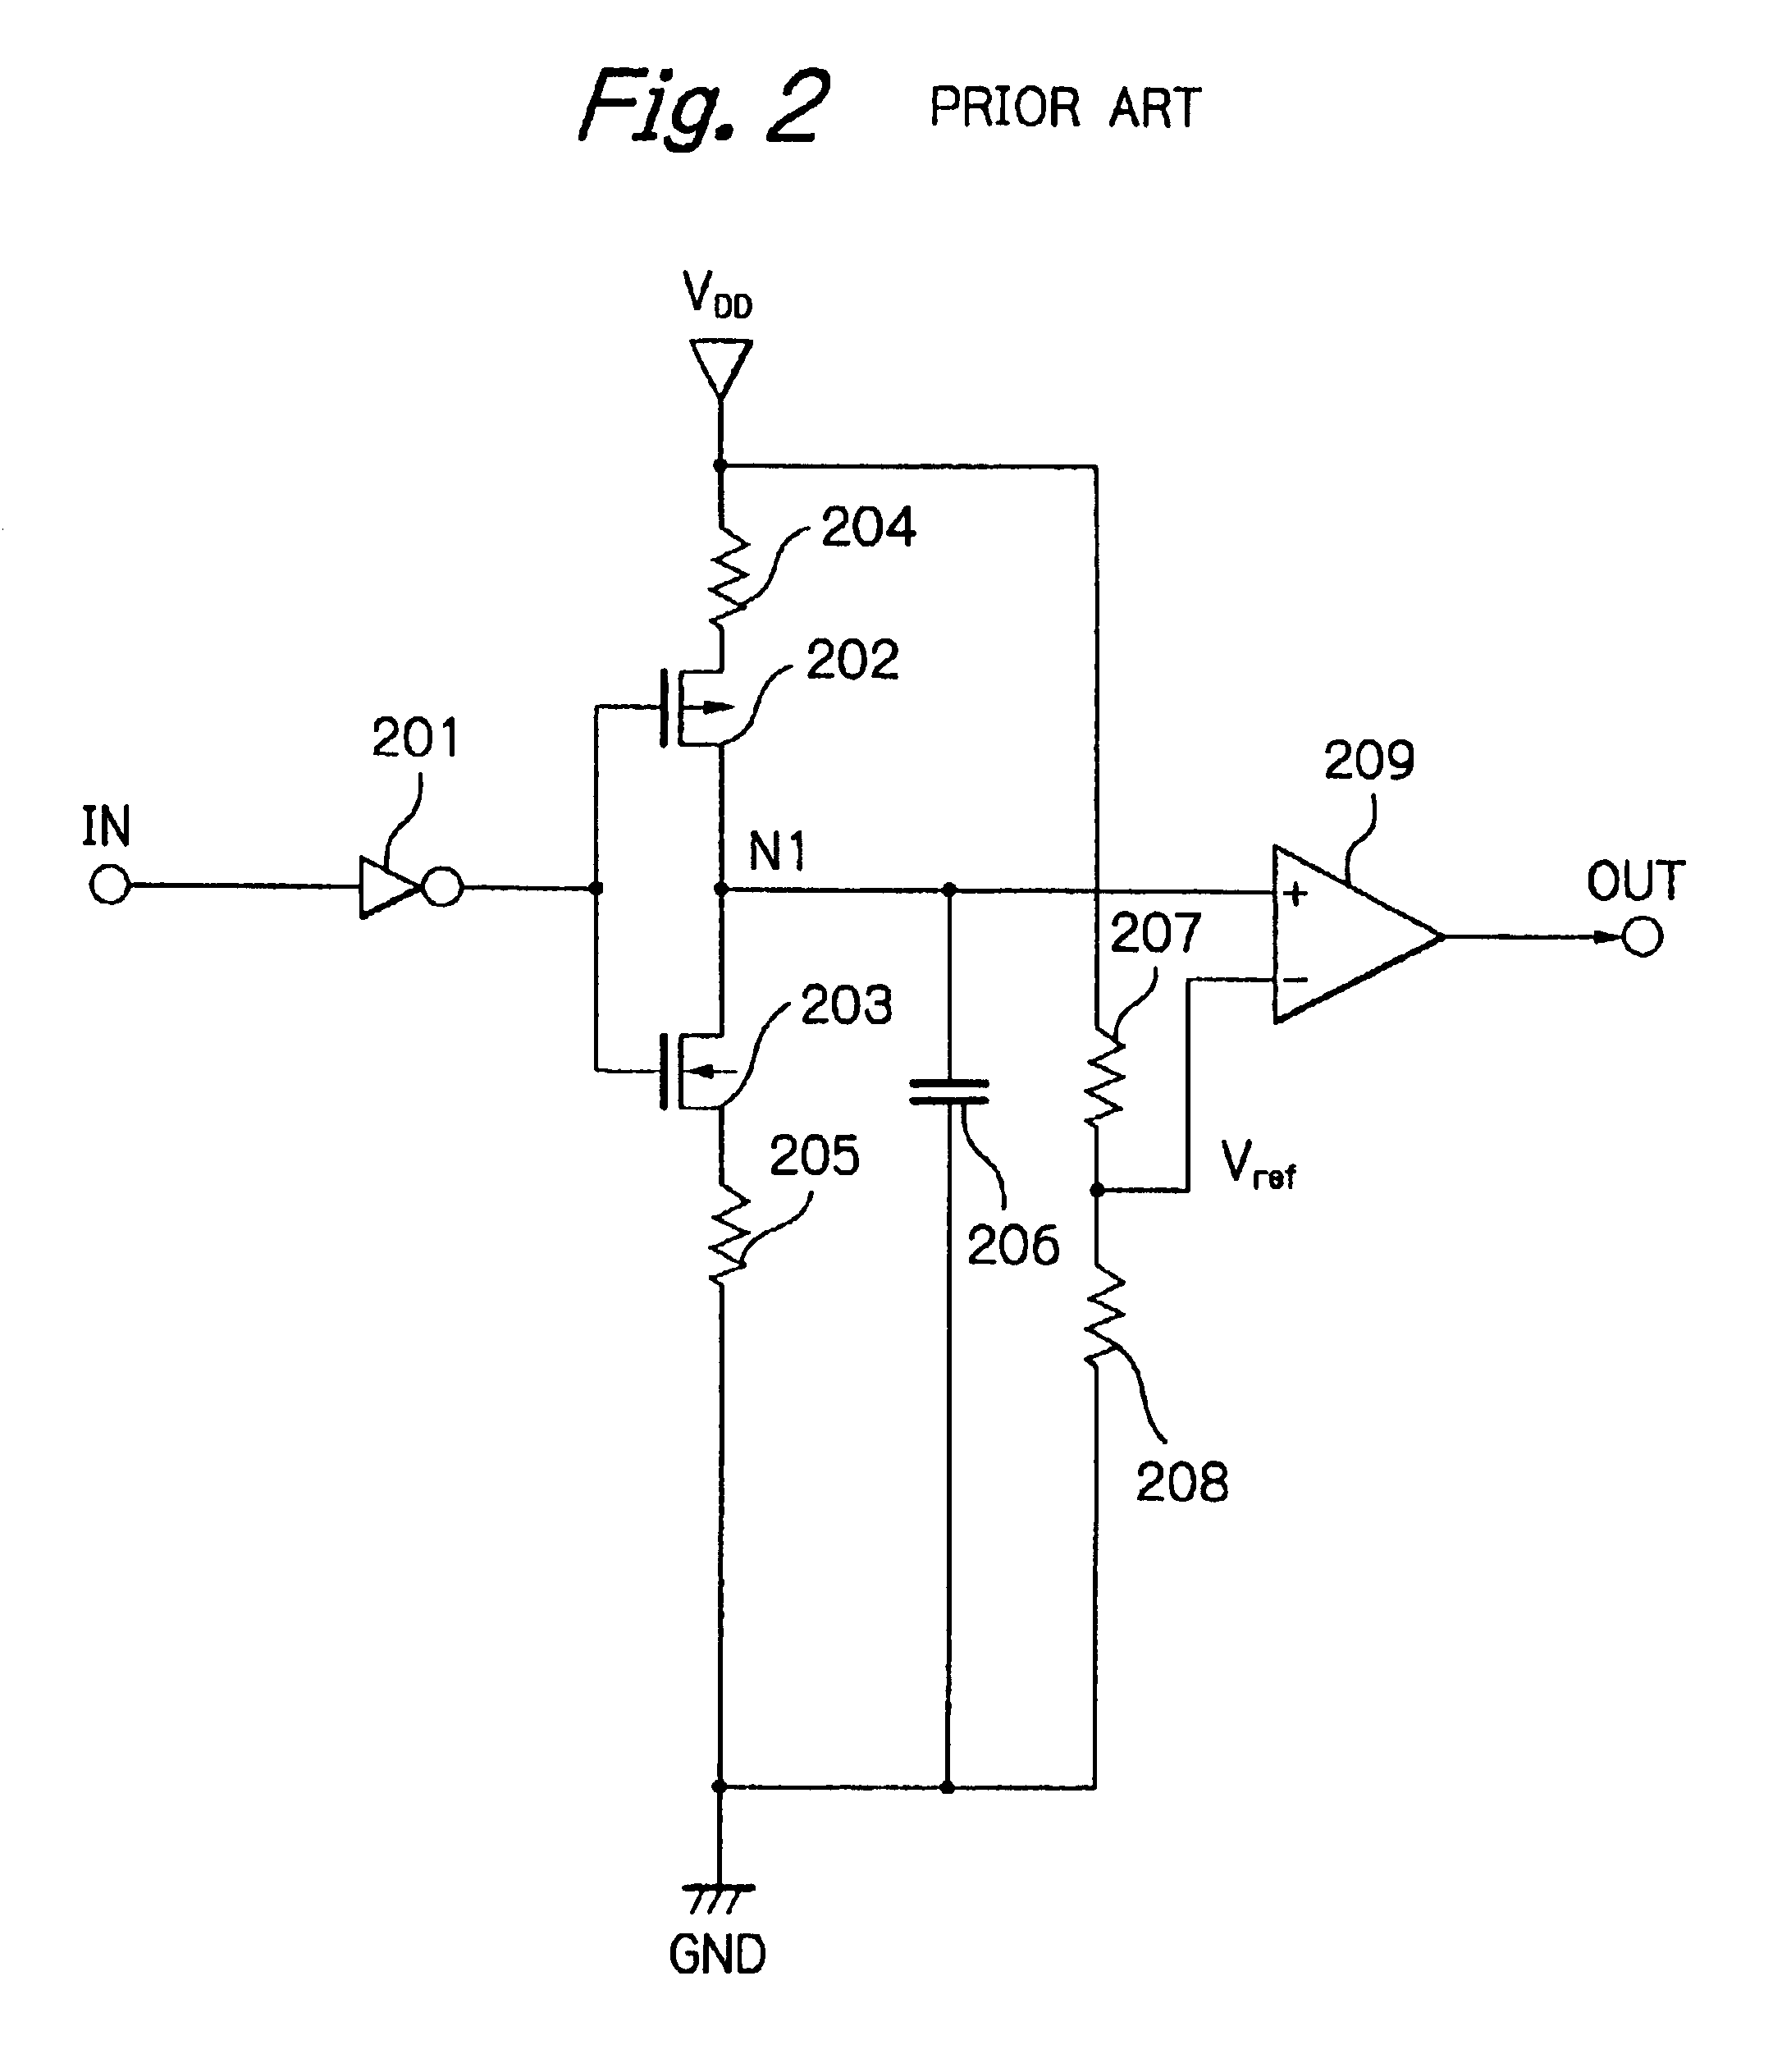 Chattering eliminating apparatus including oscillation circuit using charging and discharging operations